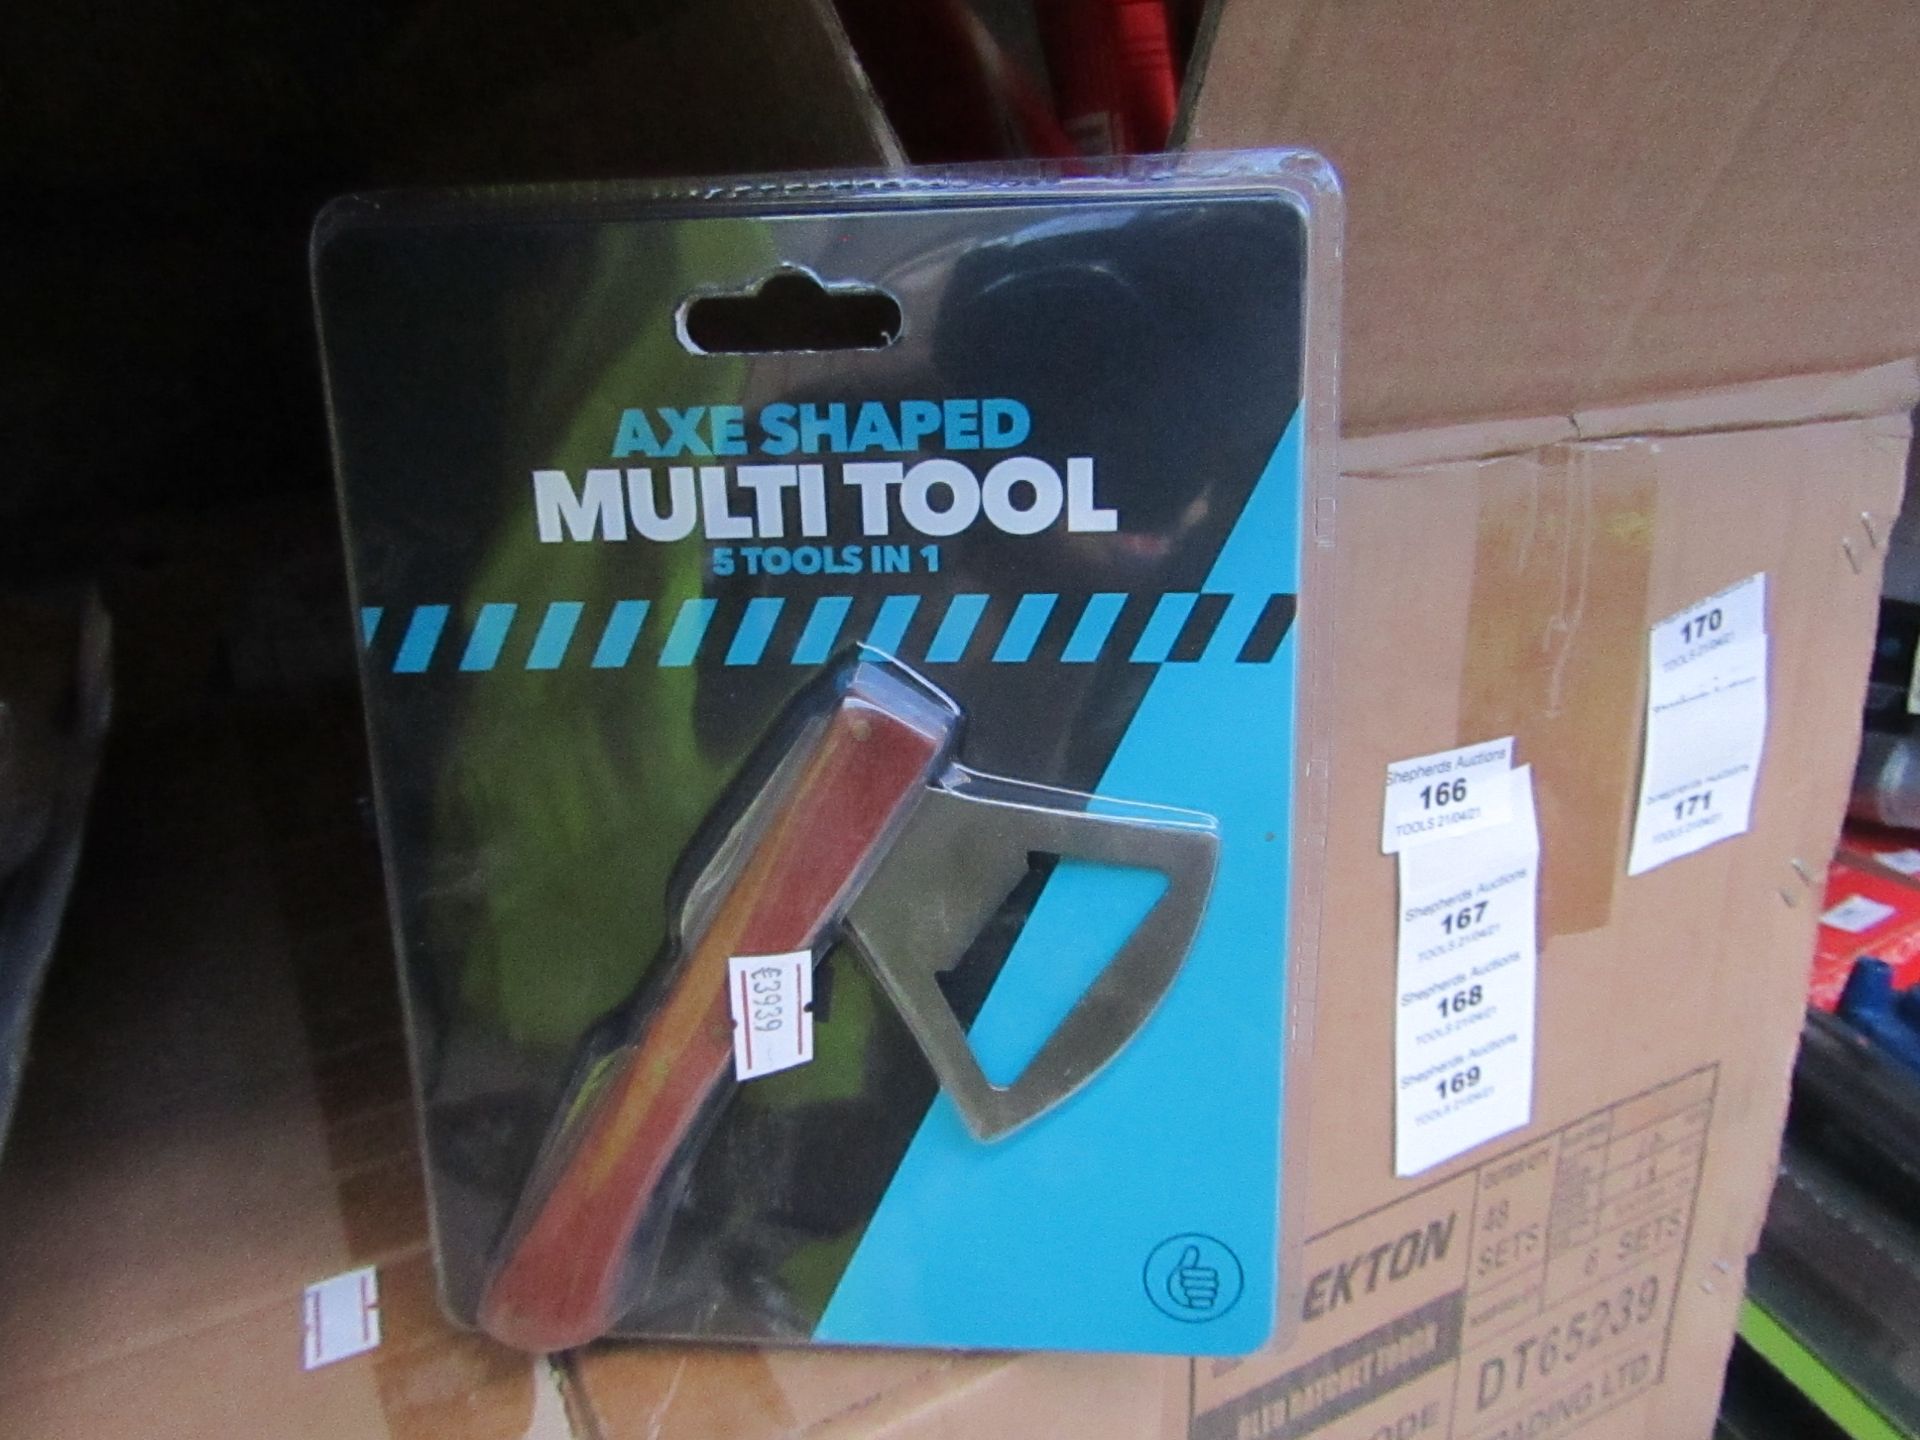 2x Axe Shaped 5 in 1 Multi tools, new and packaged